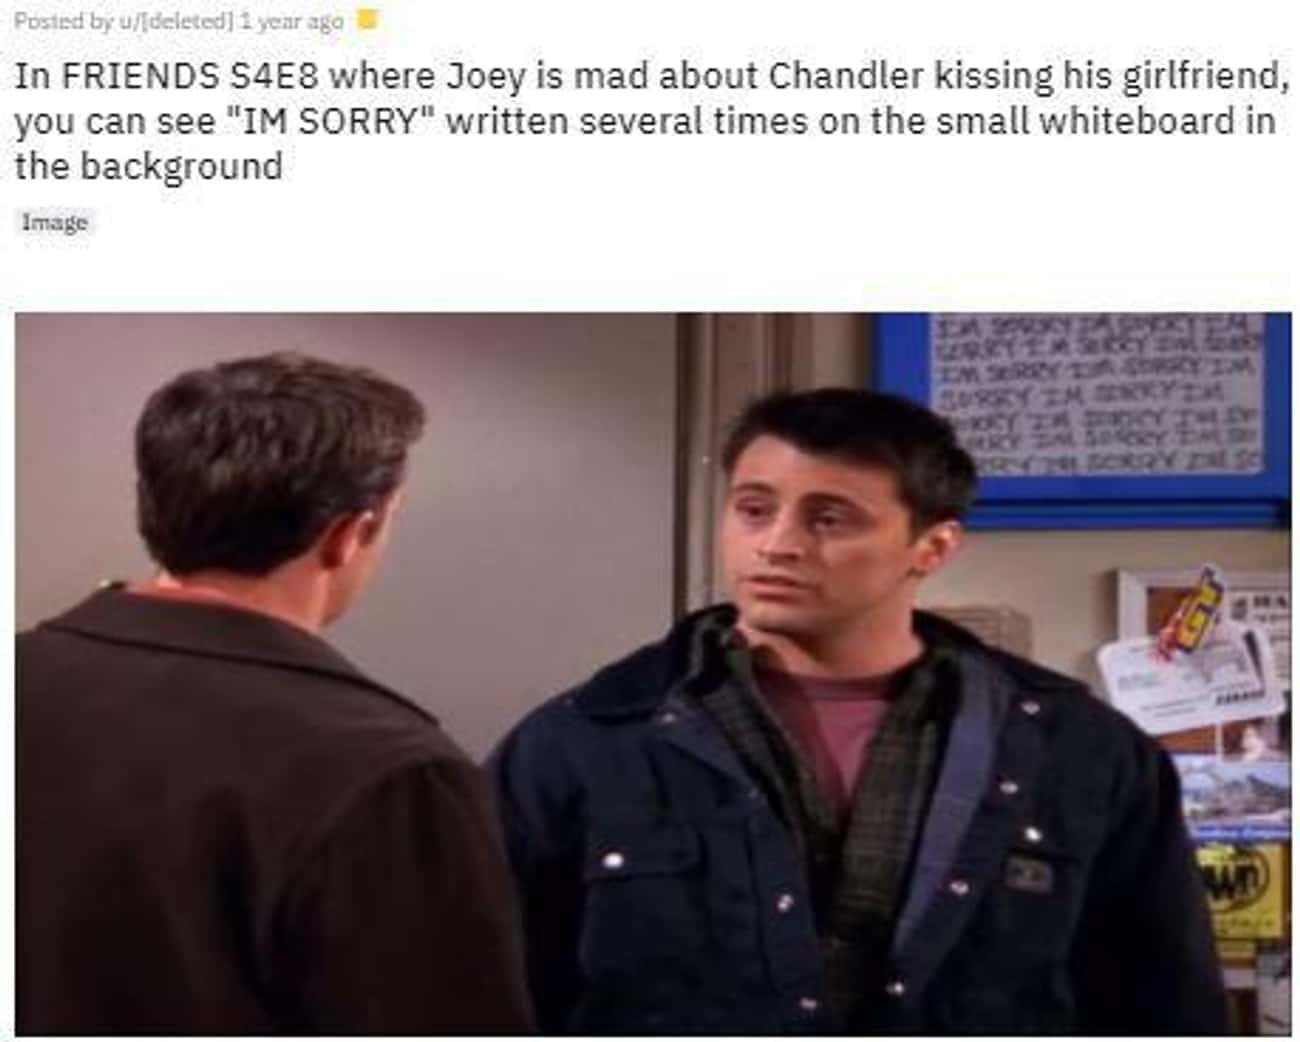 Chandler's Attempts To Win Joey Back